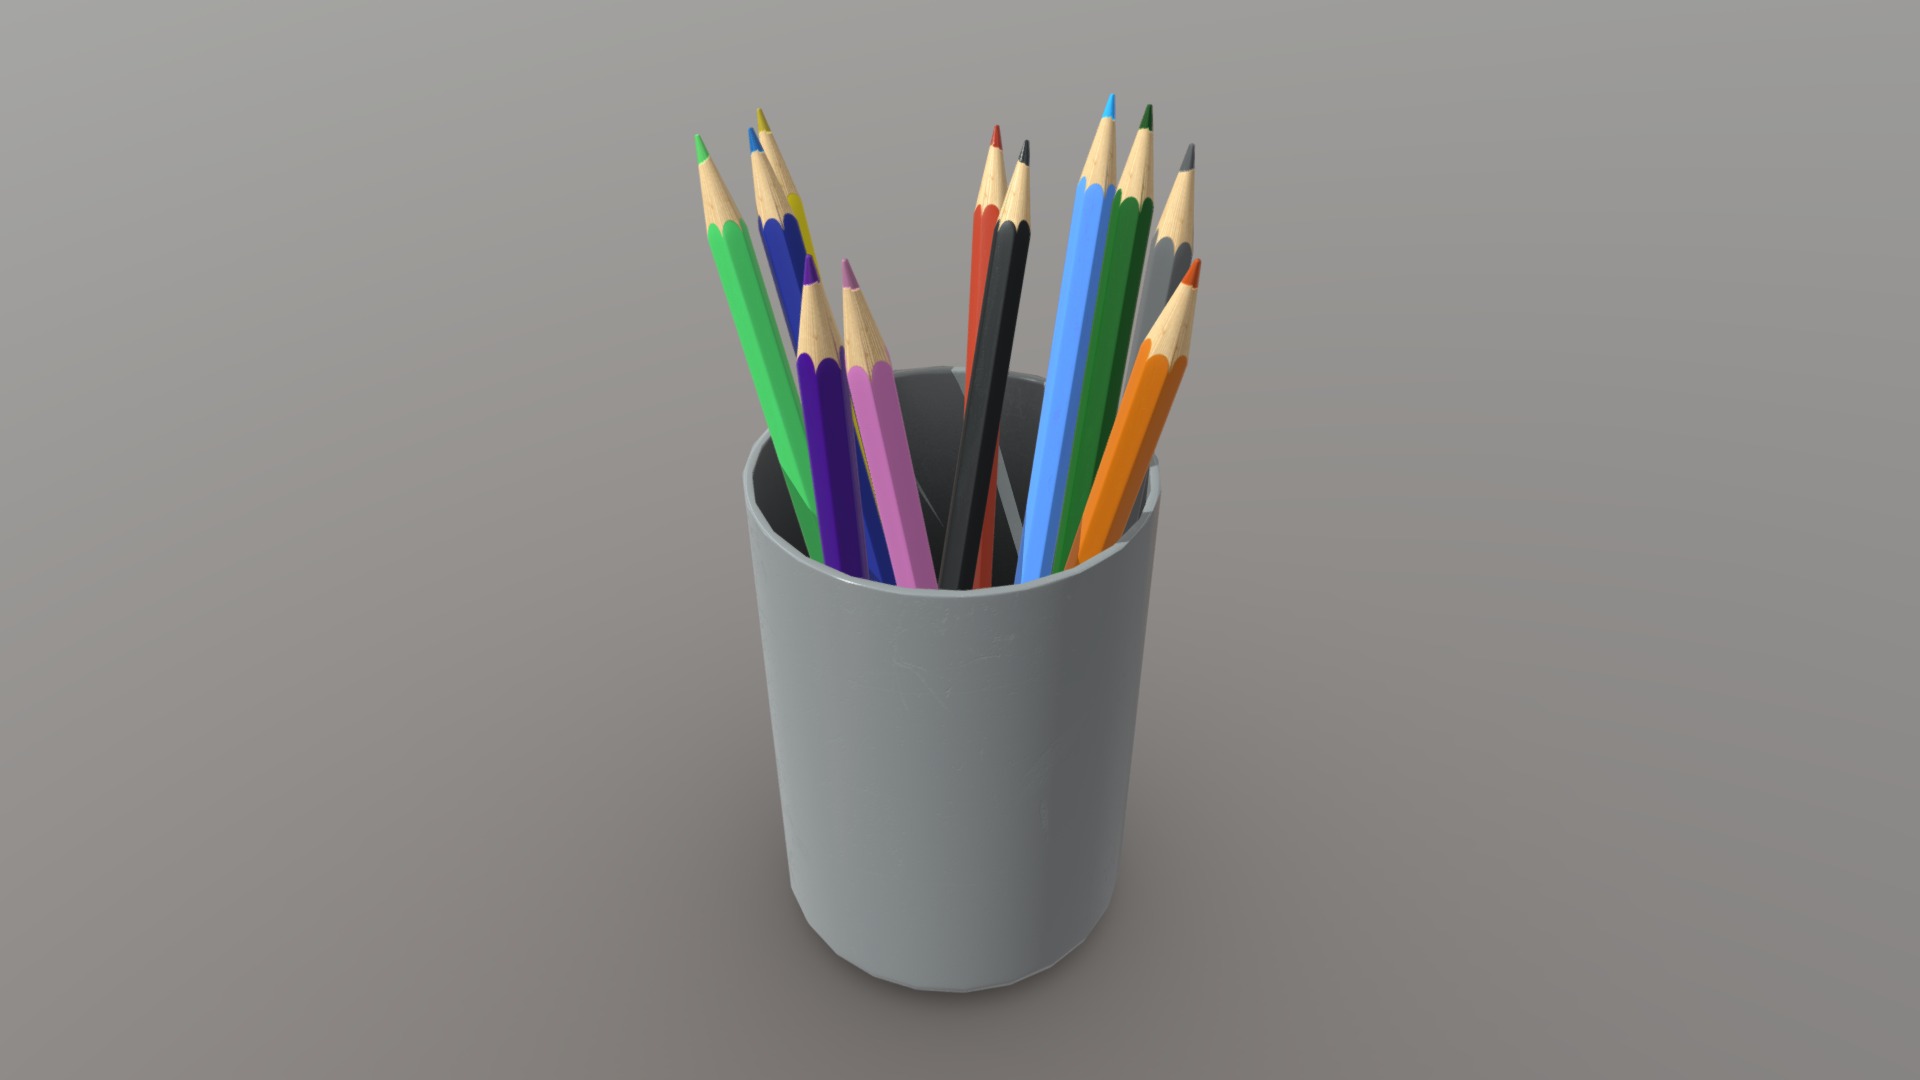 3D model Pencil Holder - This is a 3D model of the Pencil Holder. The 3D model is about a cup of colored pencils.